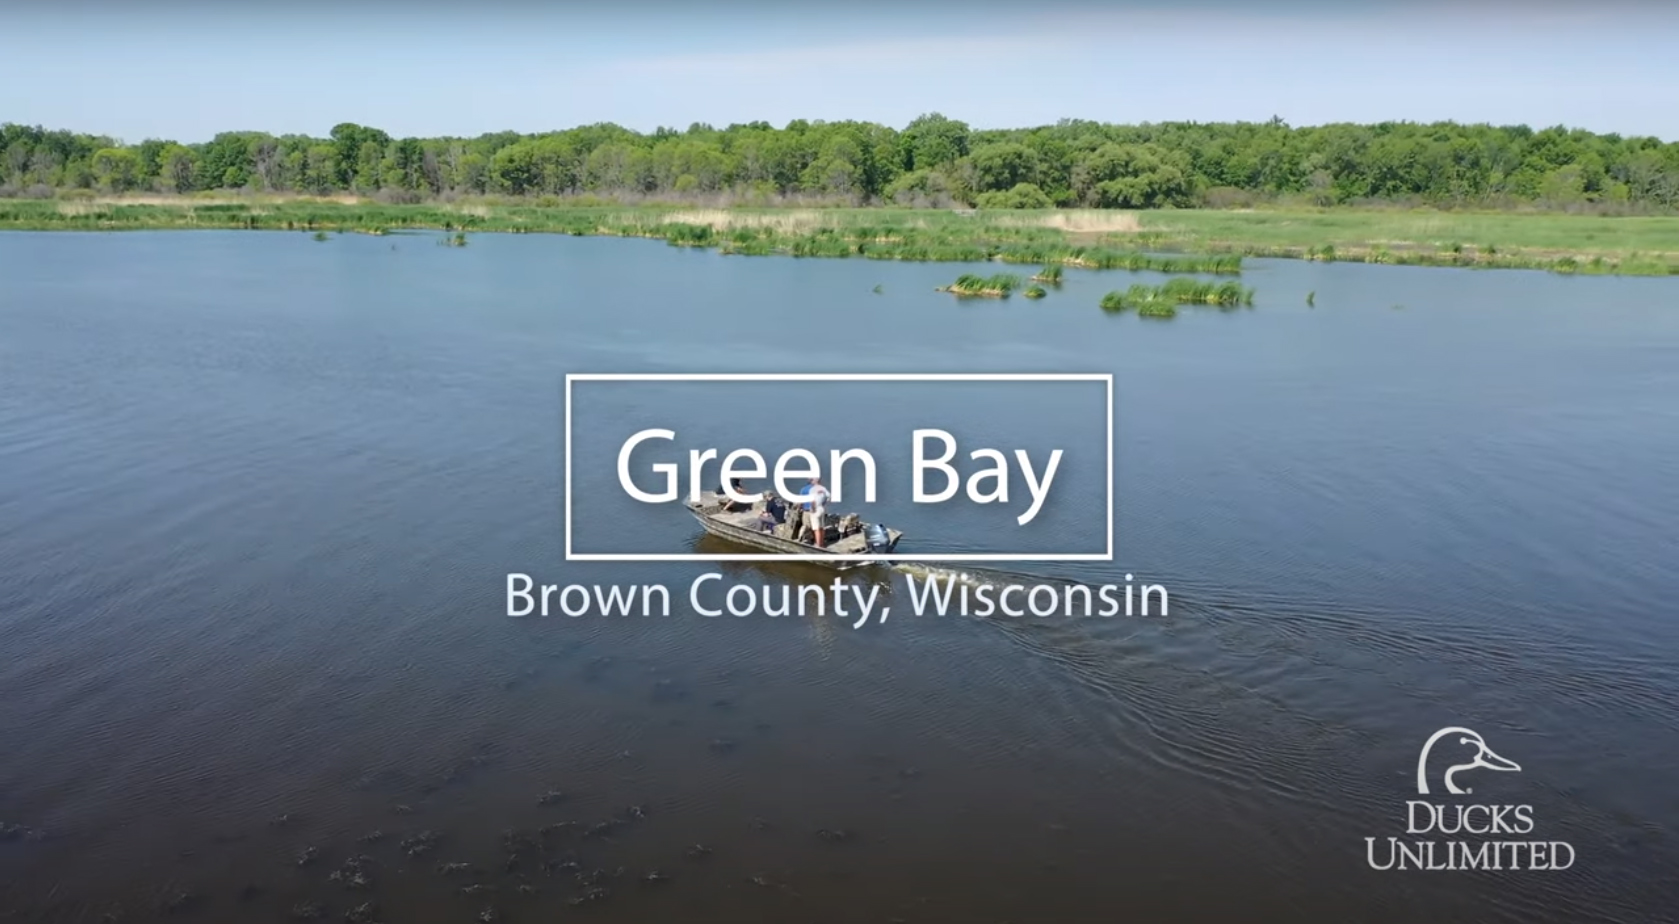 Video Thumbnail of Green Bay in Brown County, Wisconsin